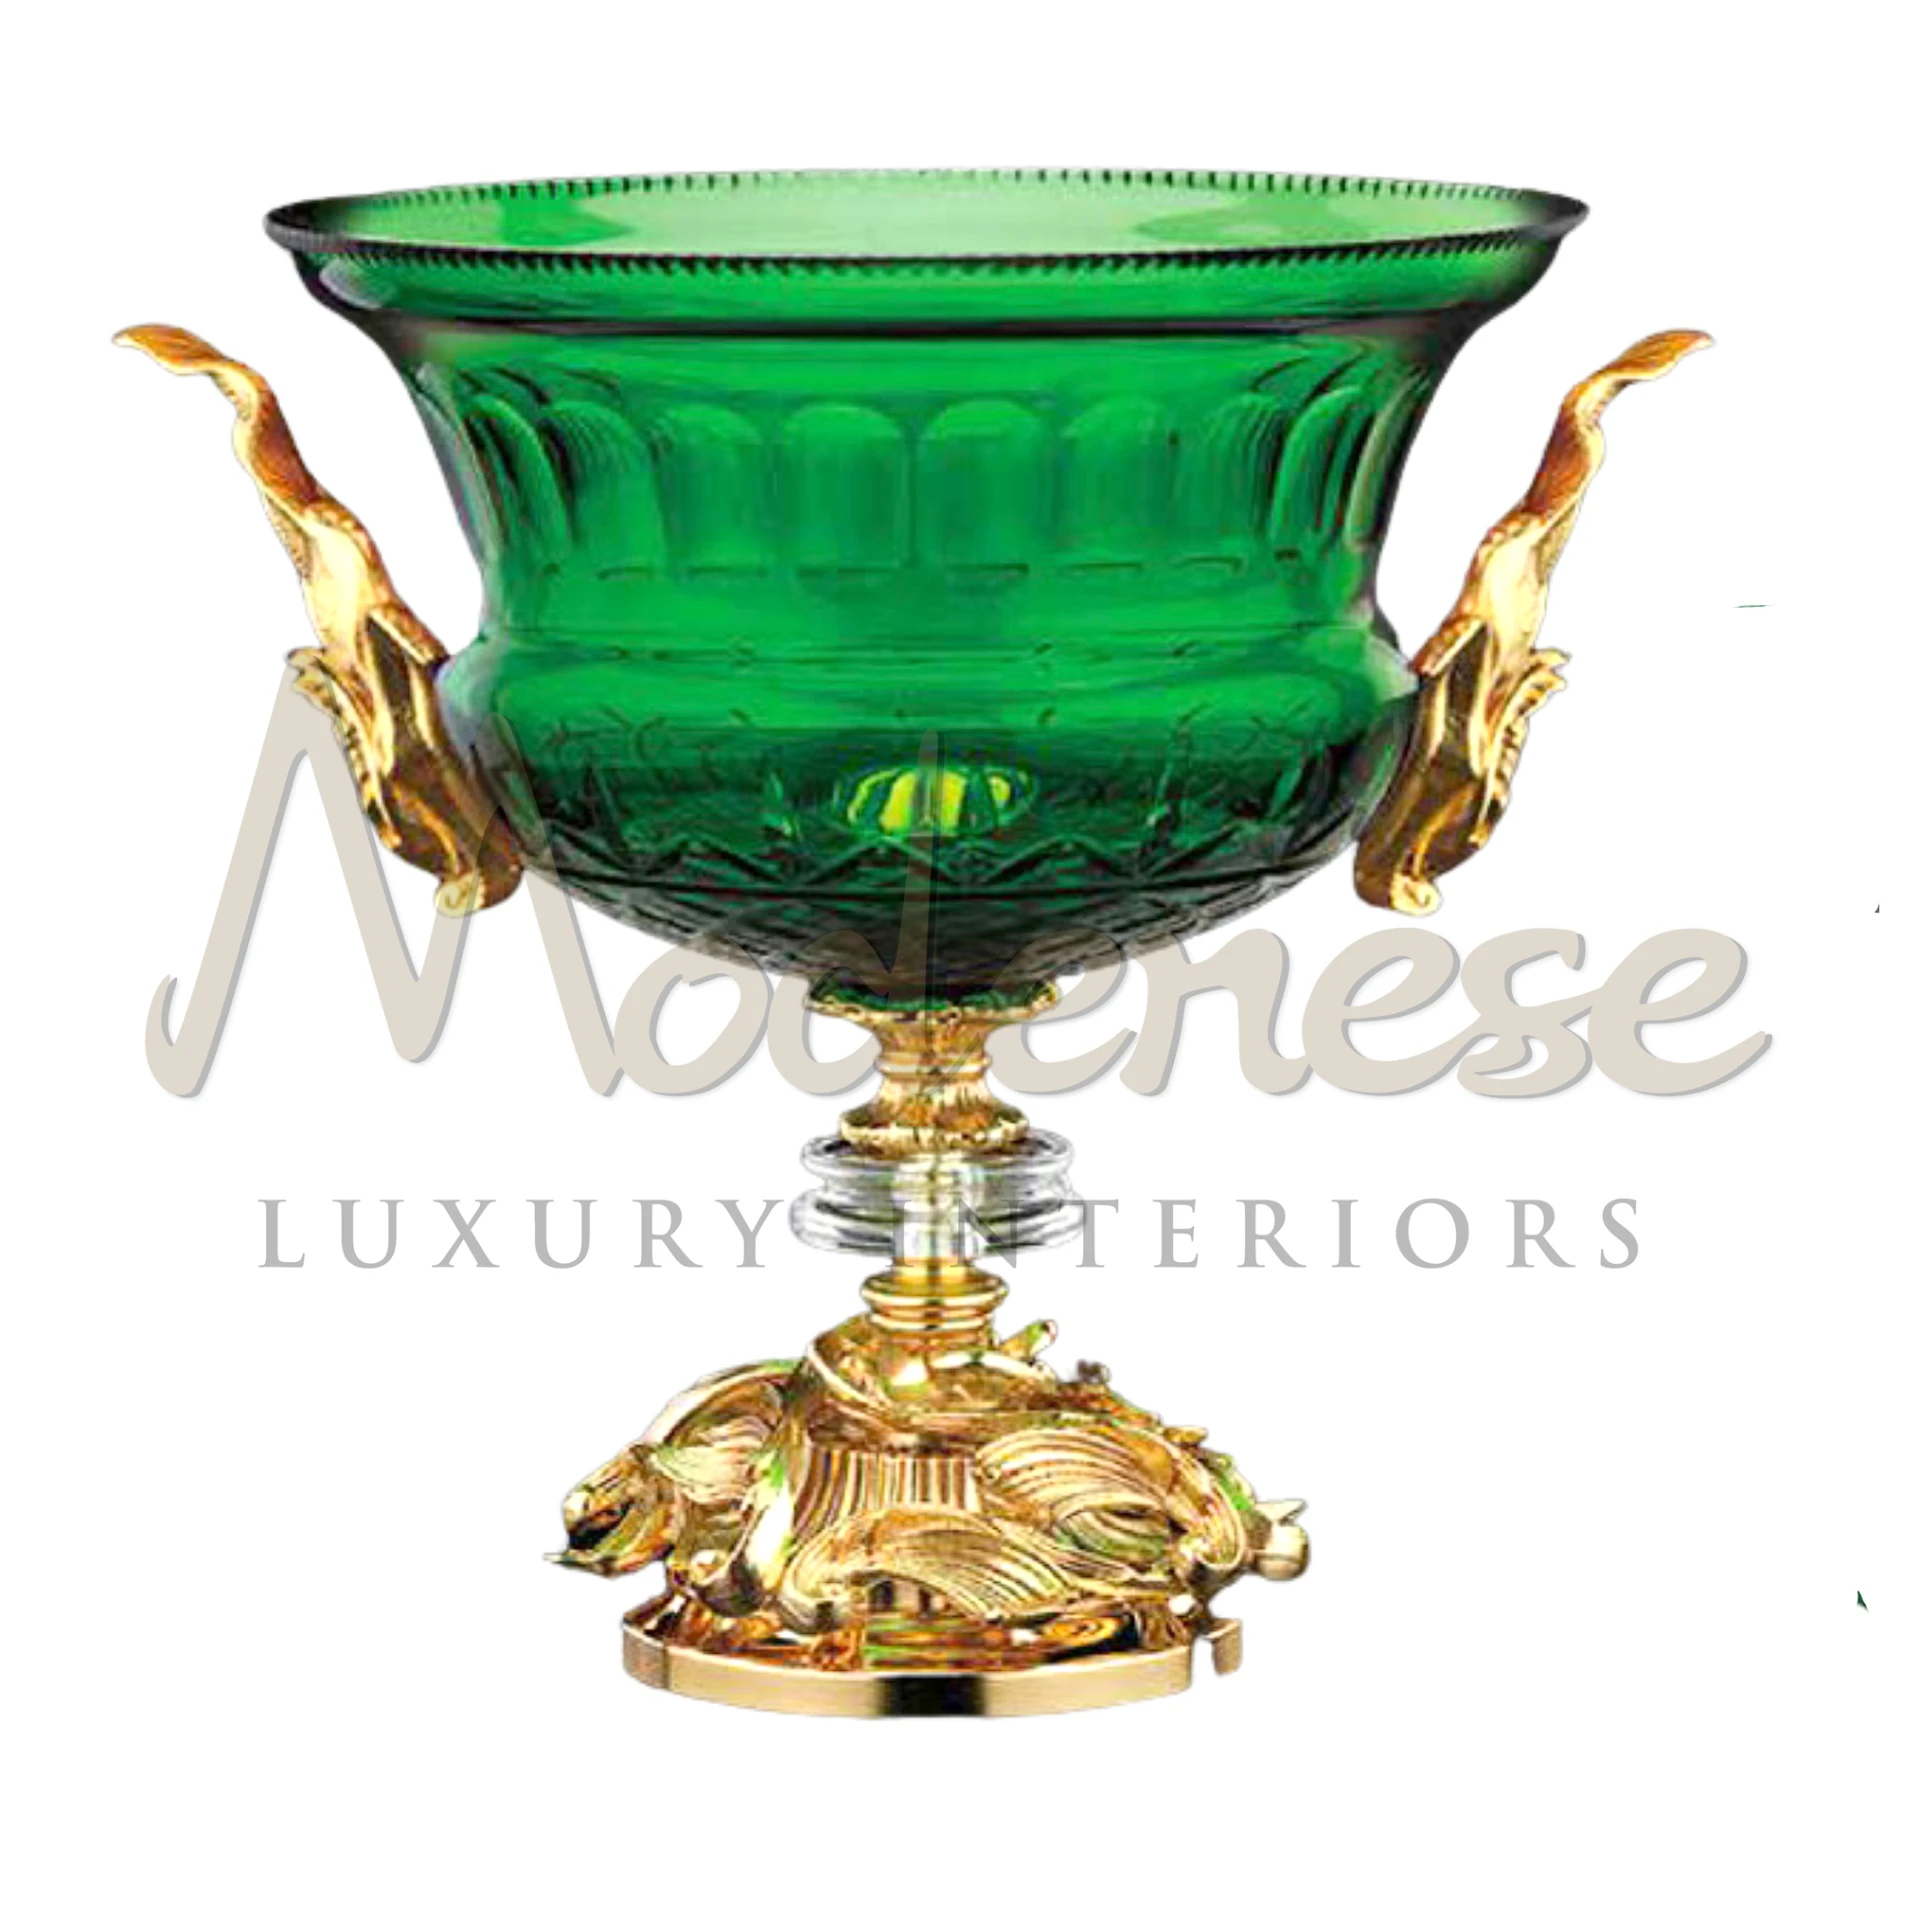 Exquisite Emerald Vase in premium glass or crystal, enhancing luxury interiors with its vibrant color and detailed craftsmanship in classic or Baroque style.